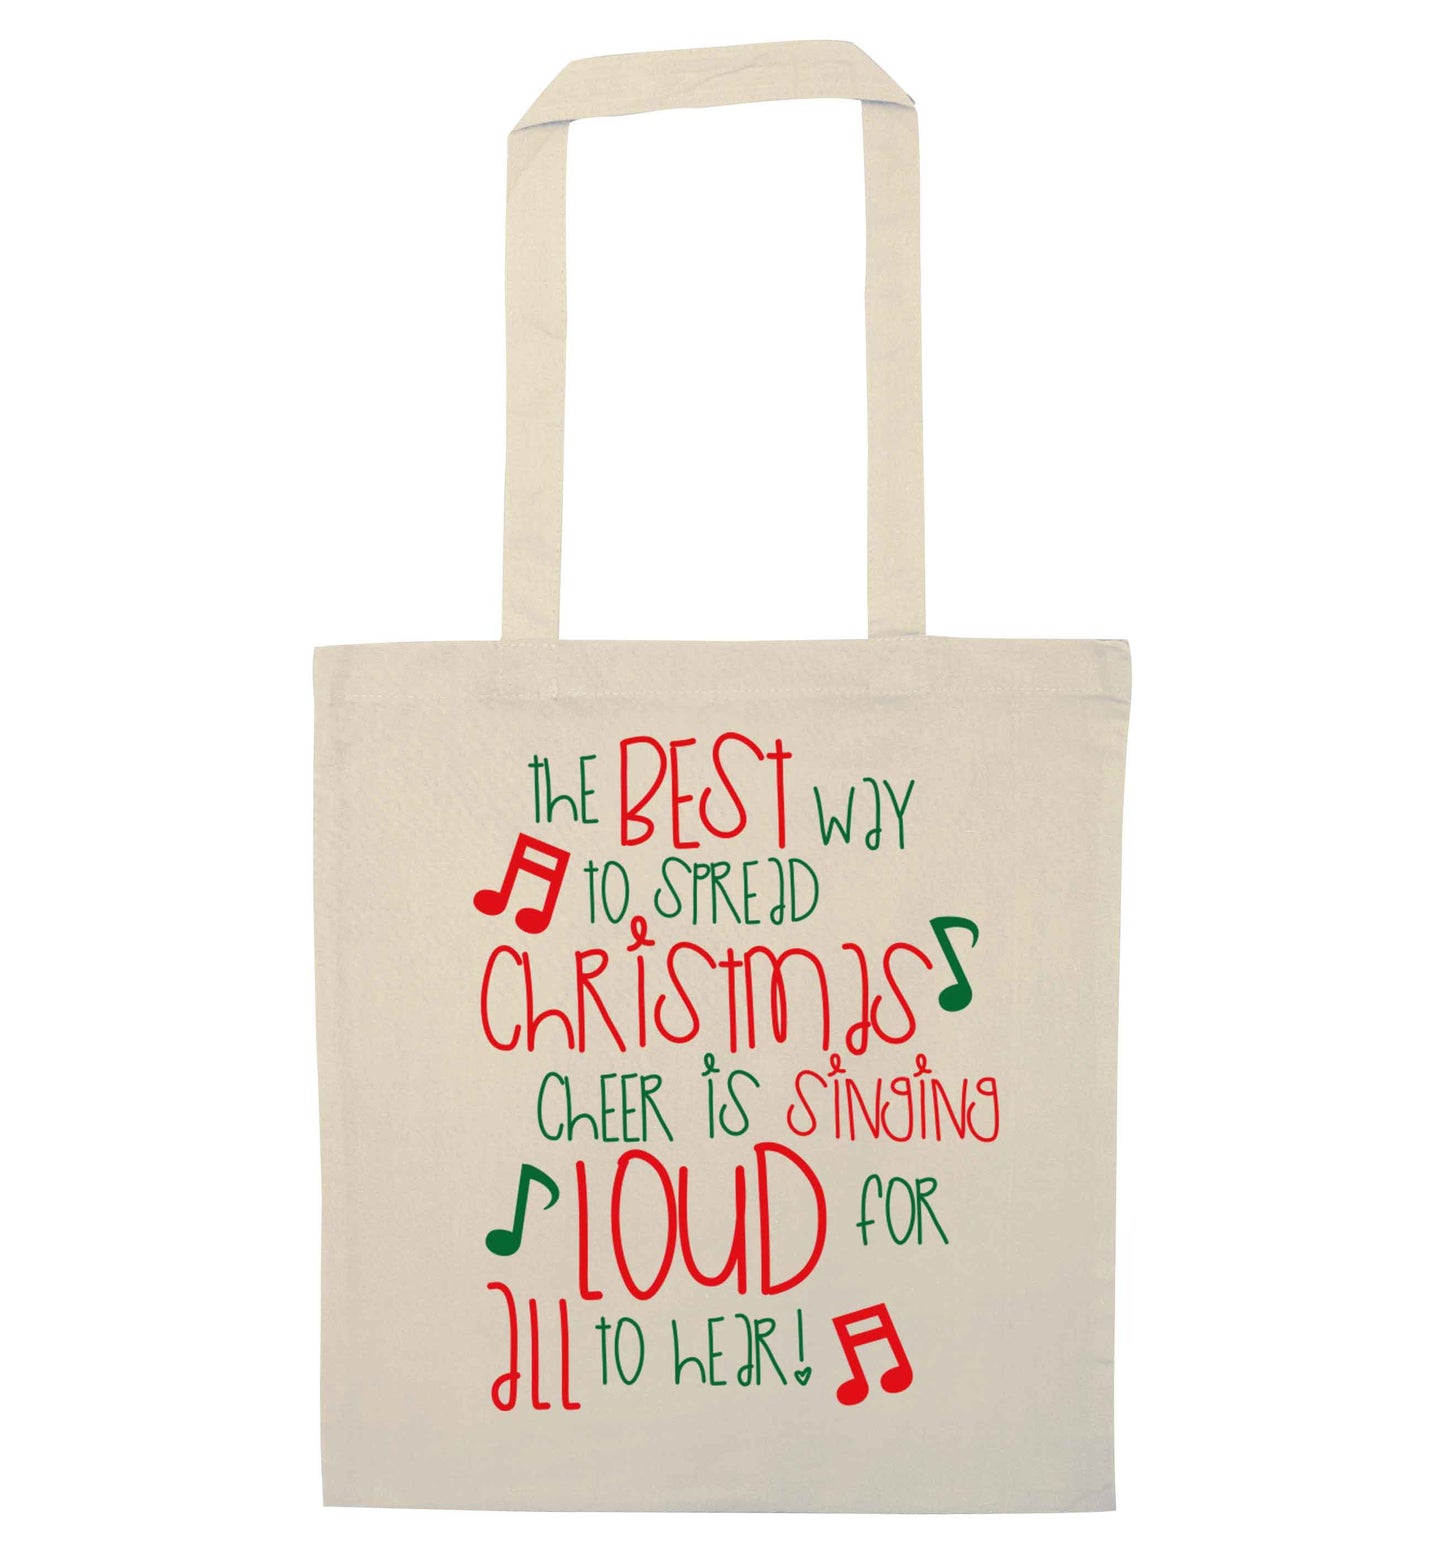 The best way to spread Christmas cheer is singing loud for all to hear natural tote bag